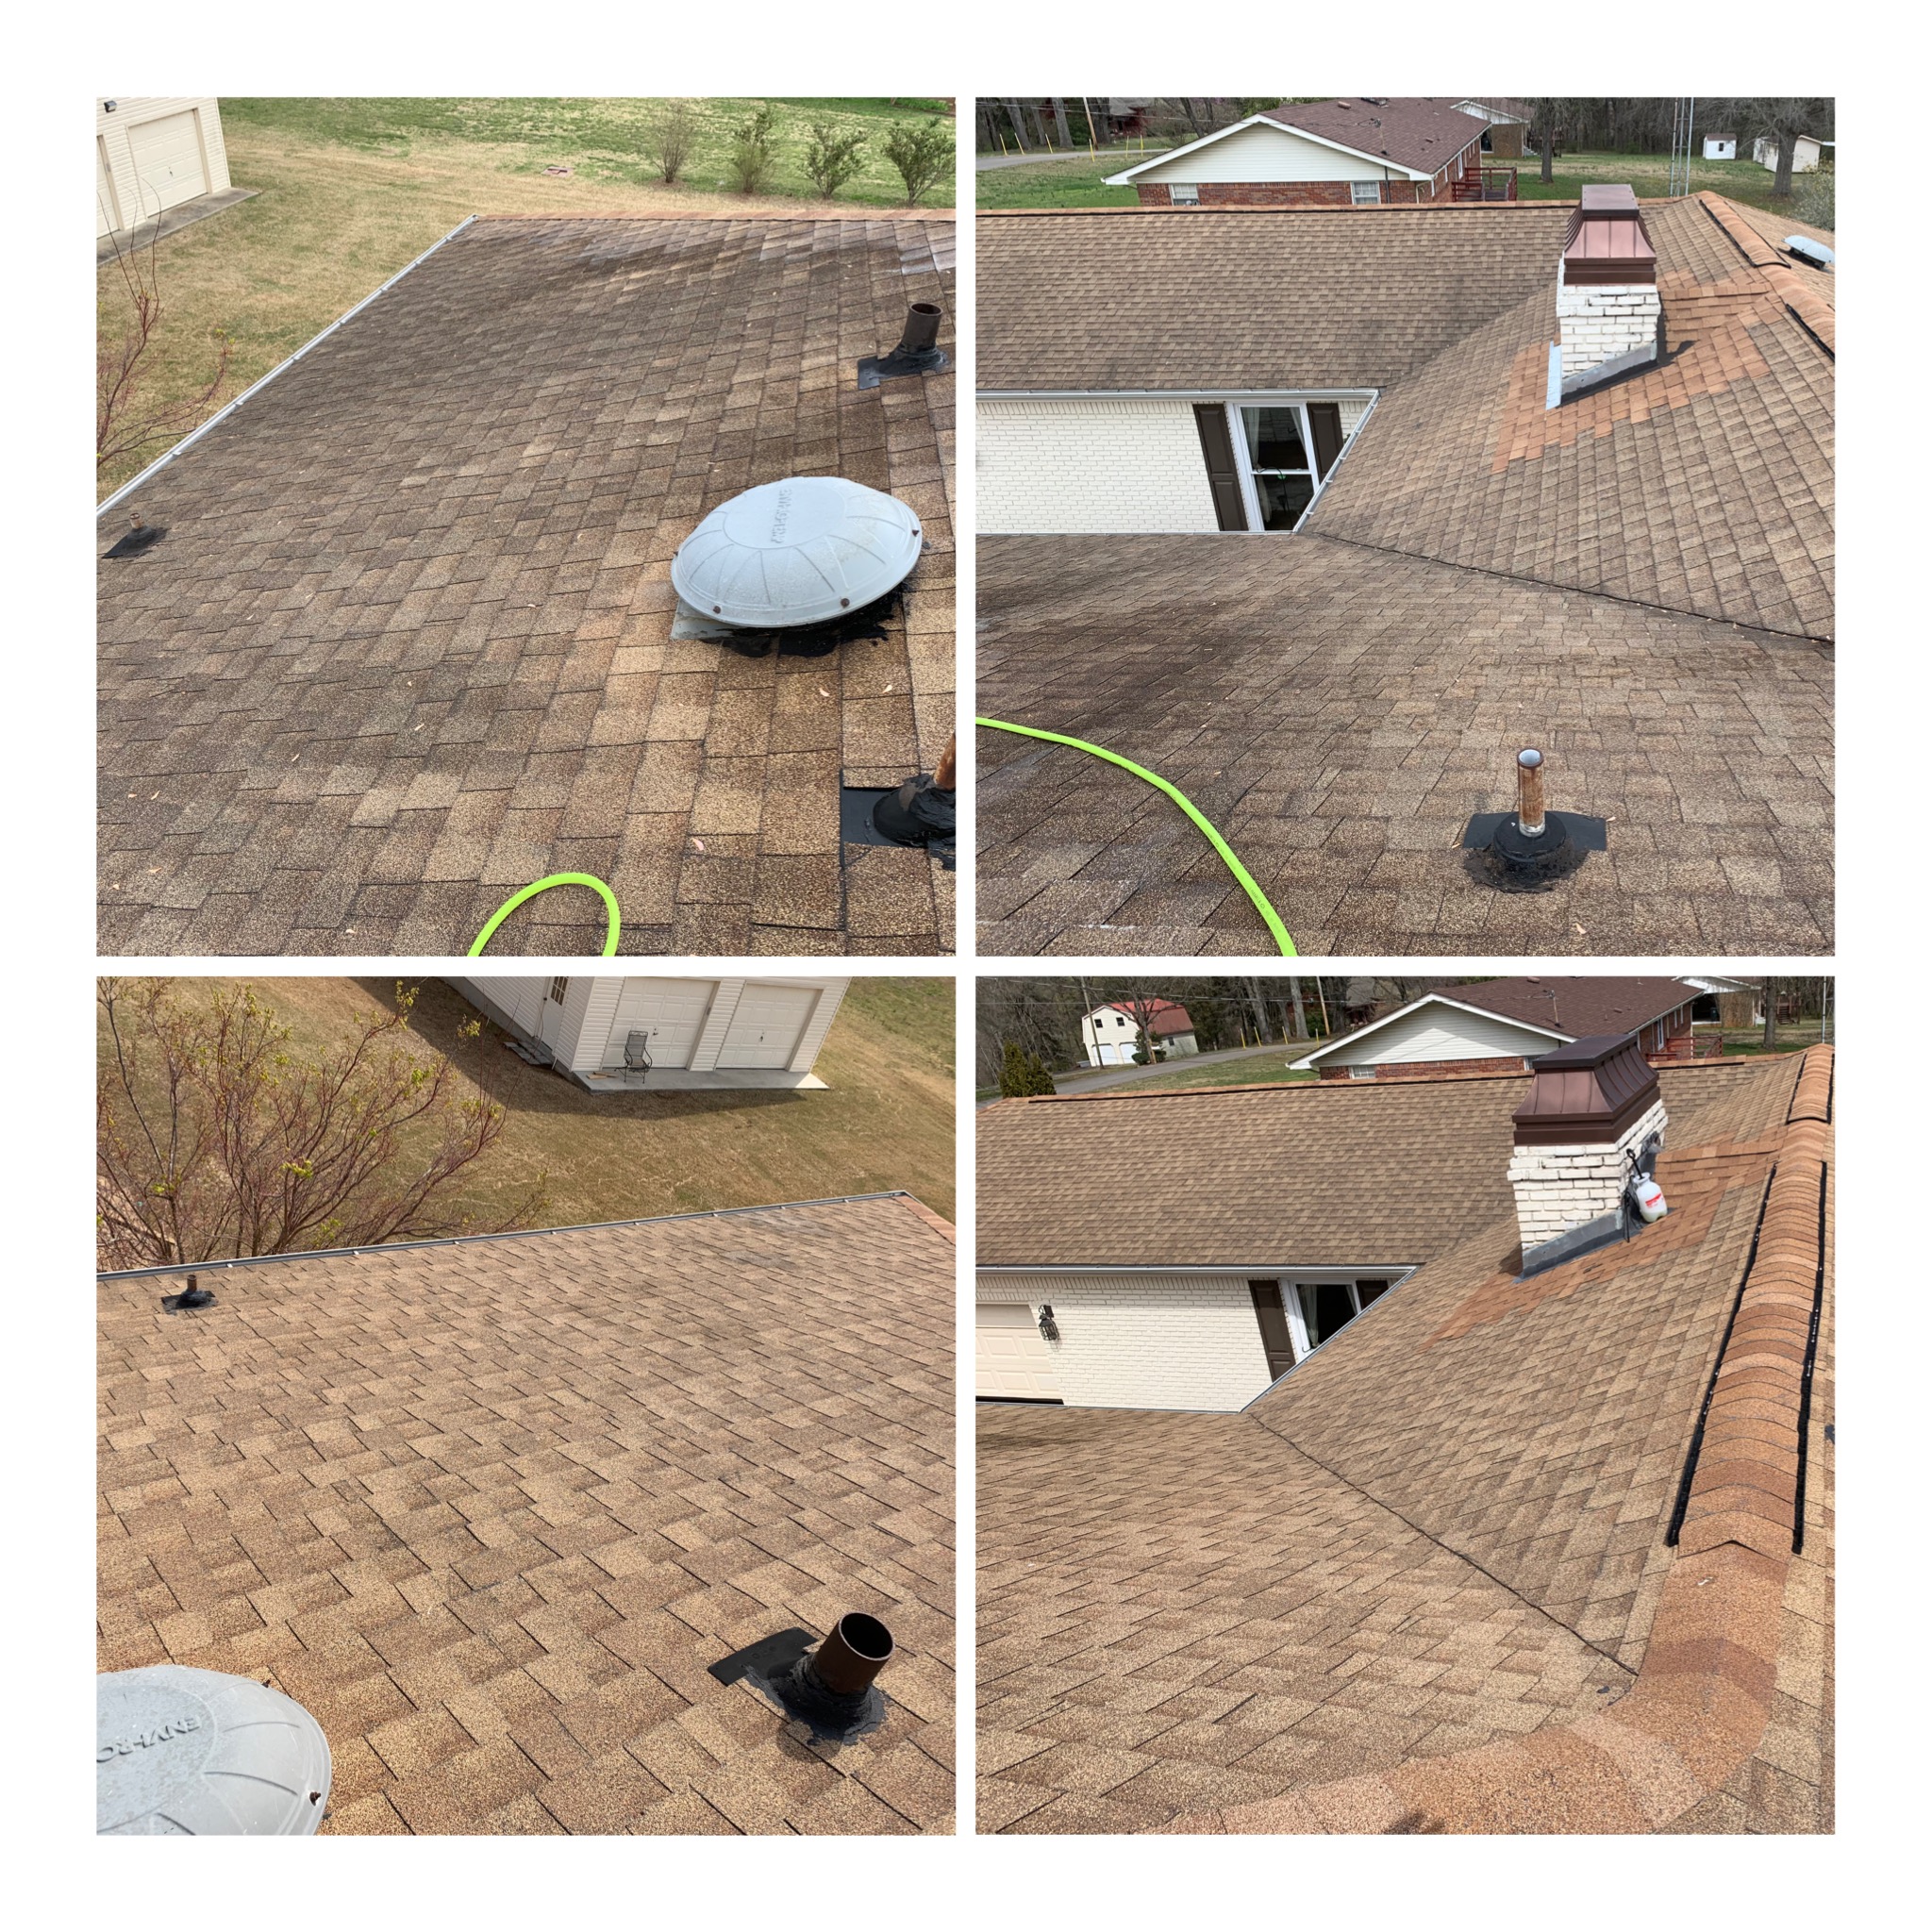 Roof Washing and Driveway Cleaning in Tuscumbia, AL